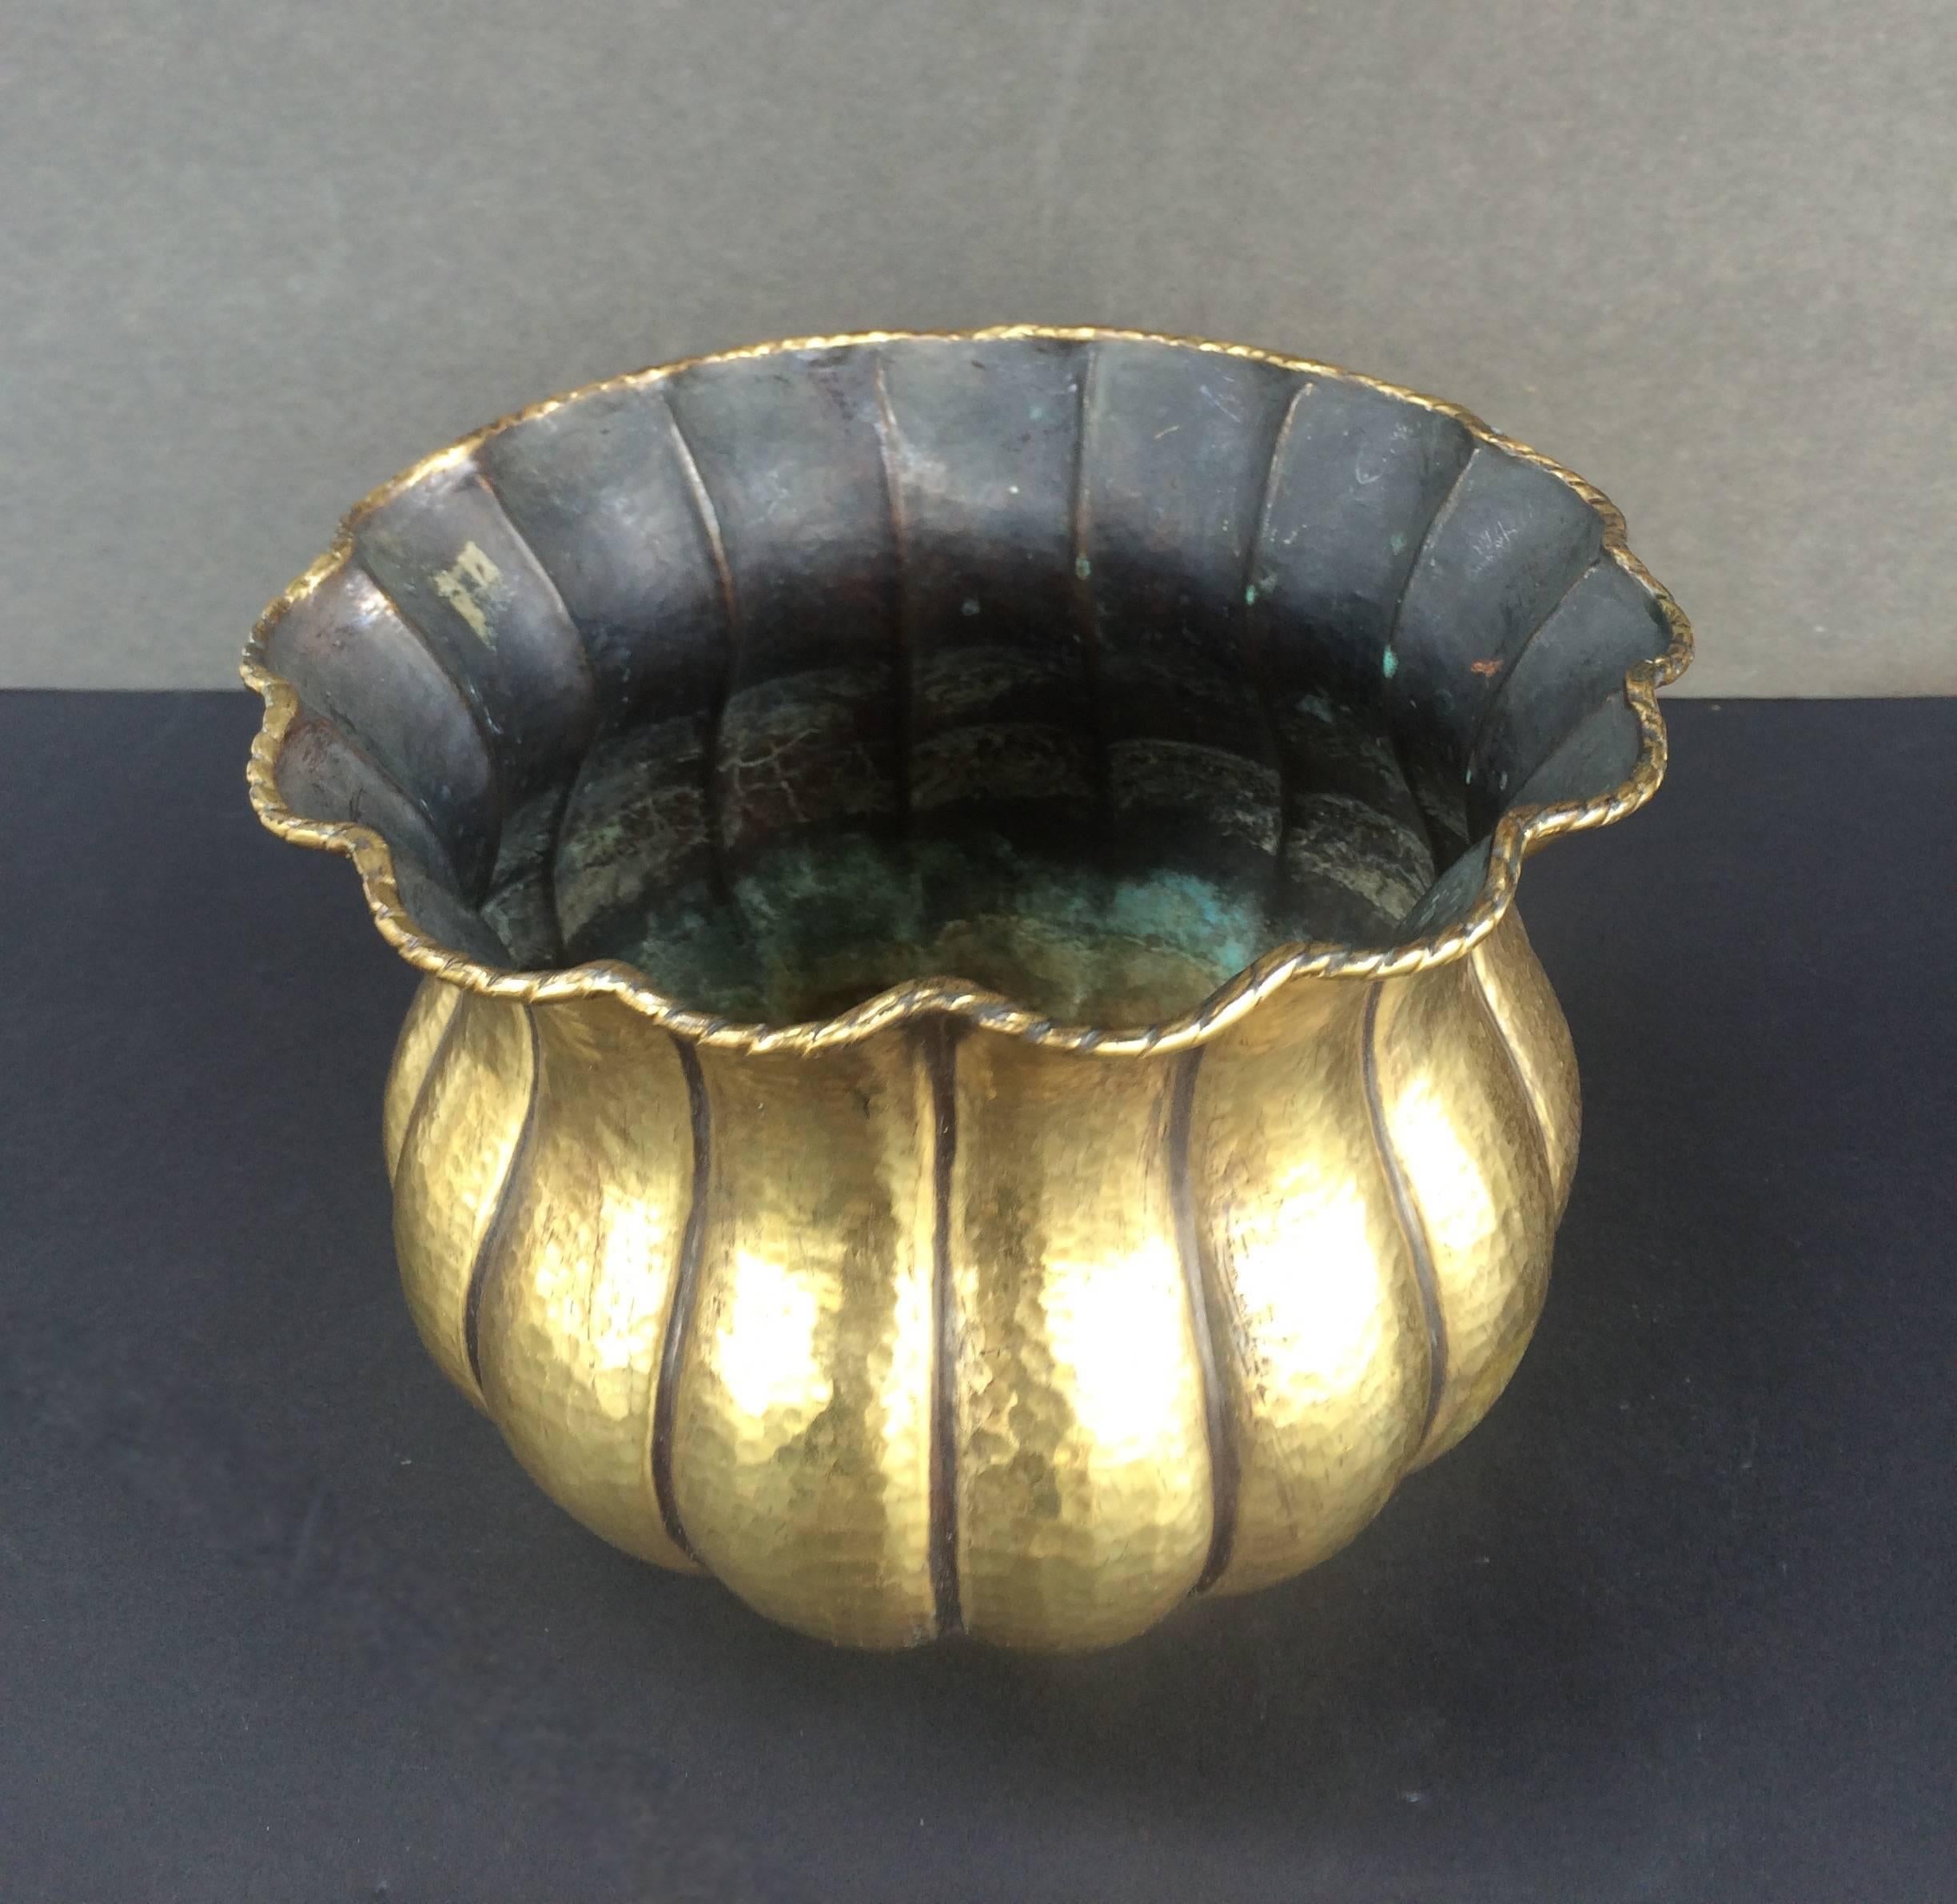 Fluted Bowl
hammered brass
stamped Italy underneath
circa 1950s
9.75 in diameter  x 7.5 ins high